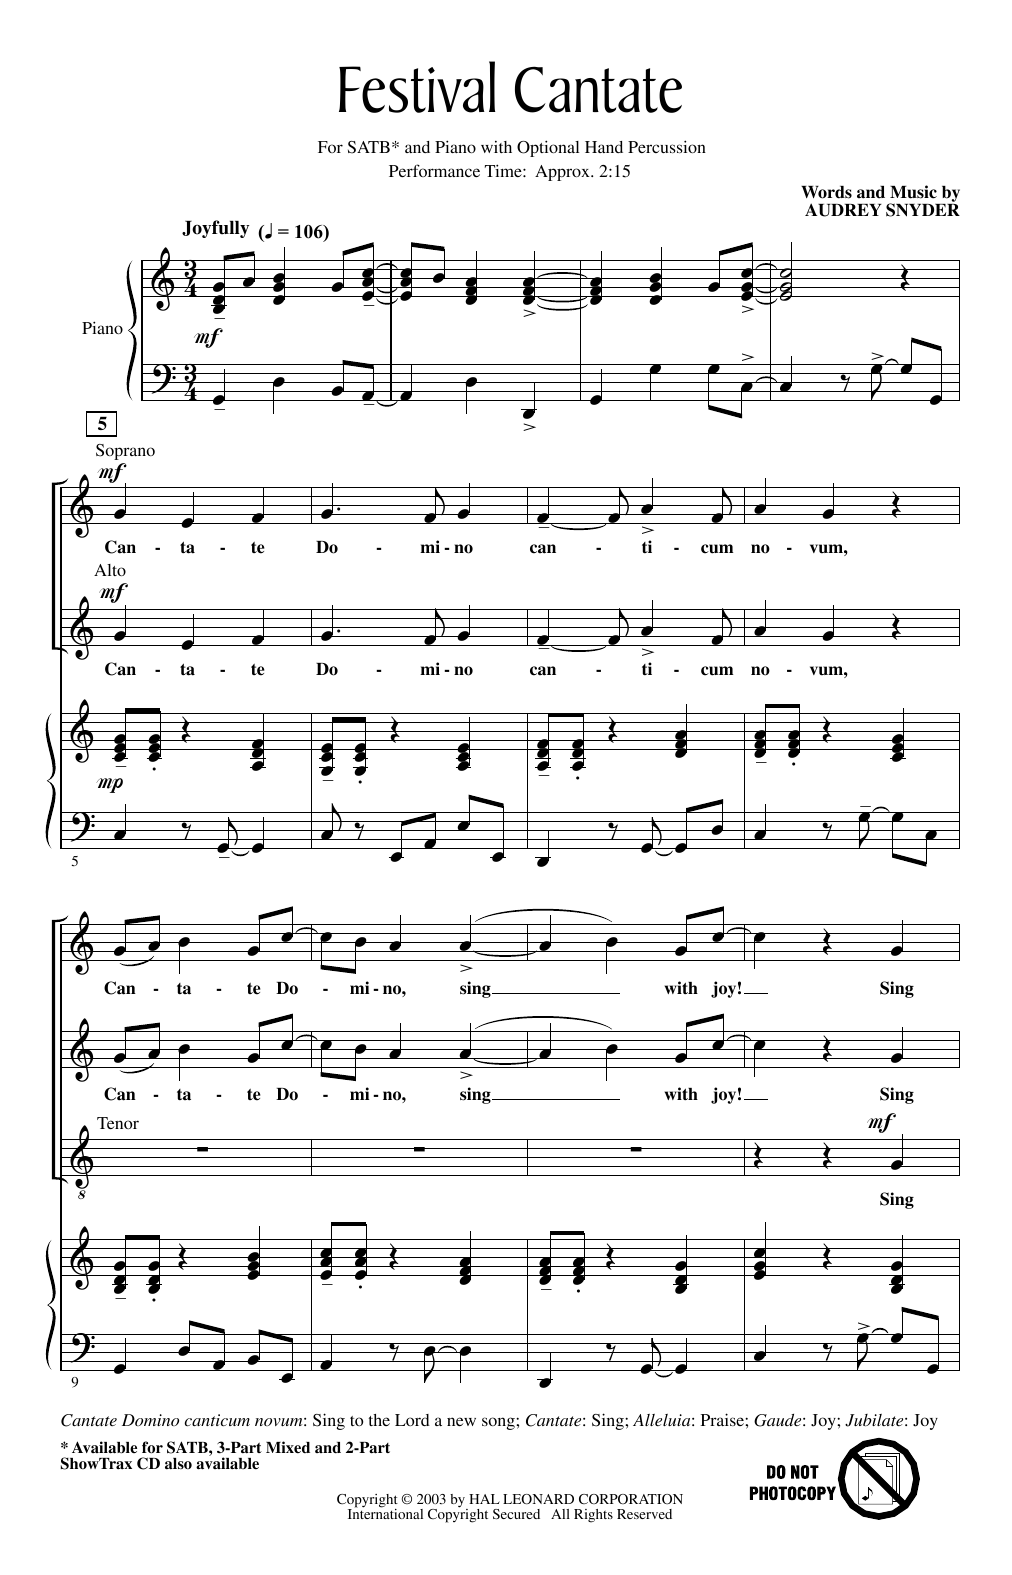 Download Audrey Snyder Festival Cantate Sheet Music